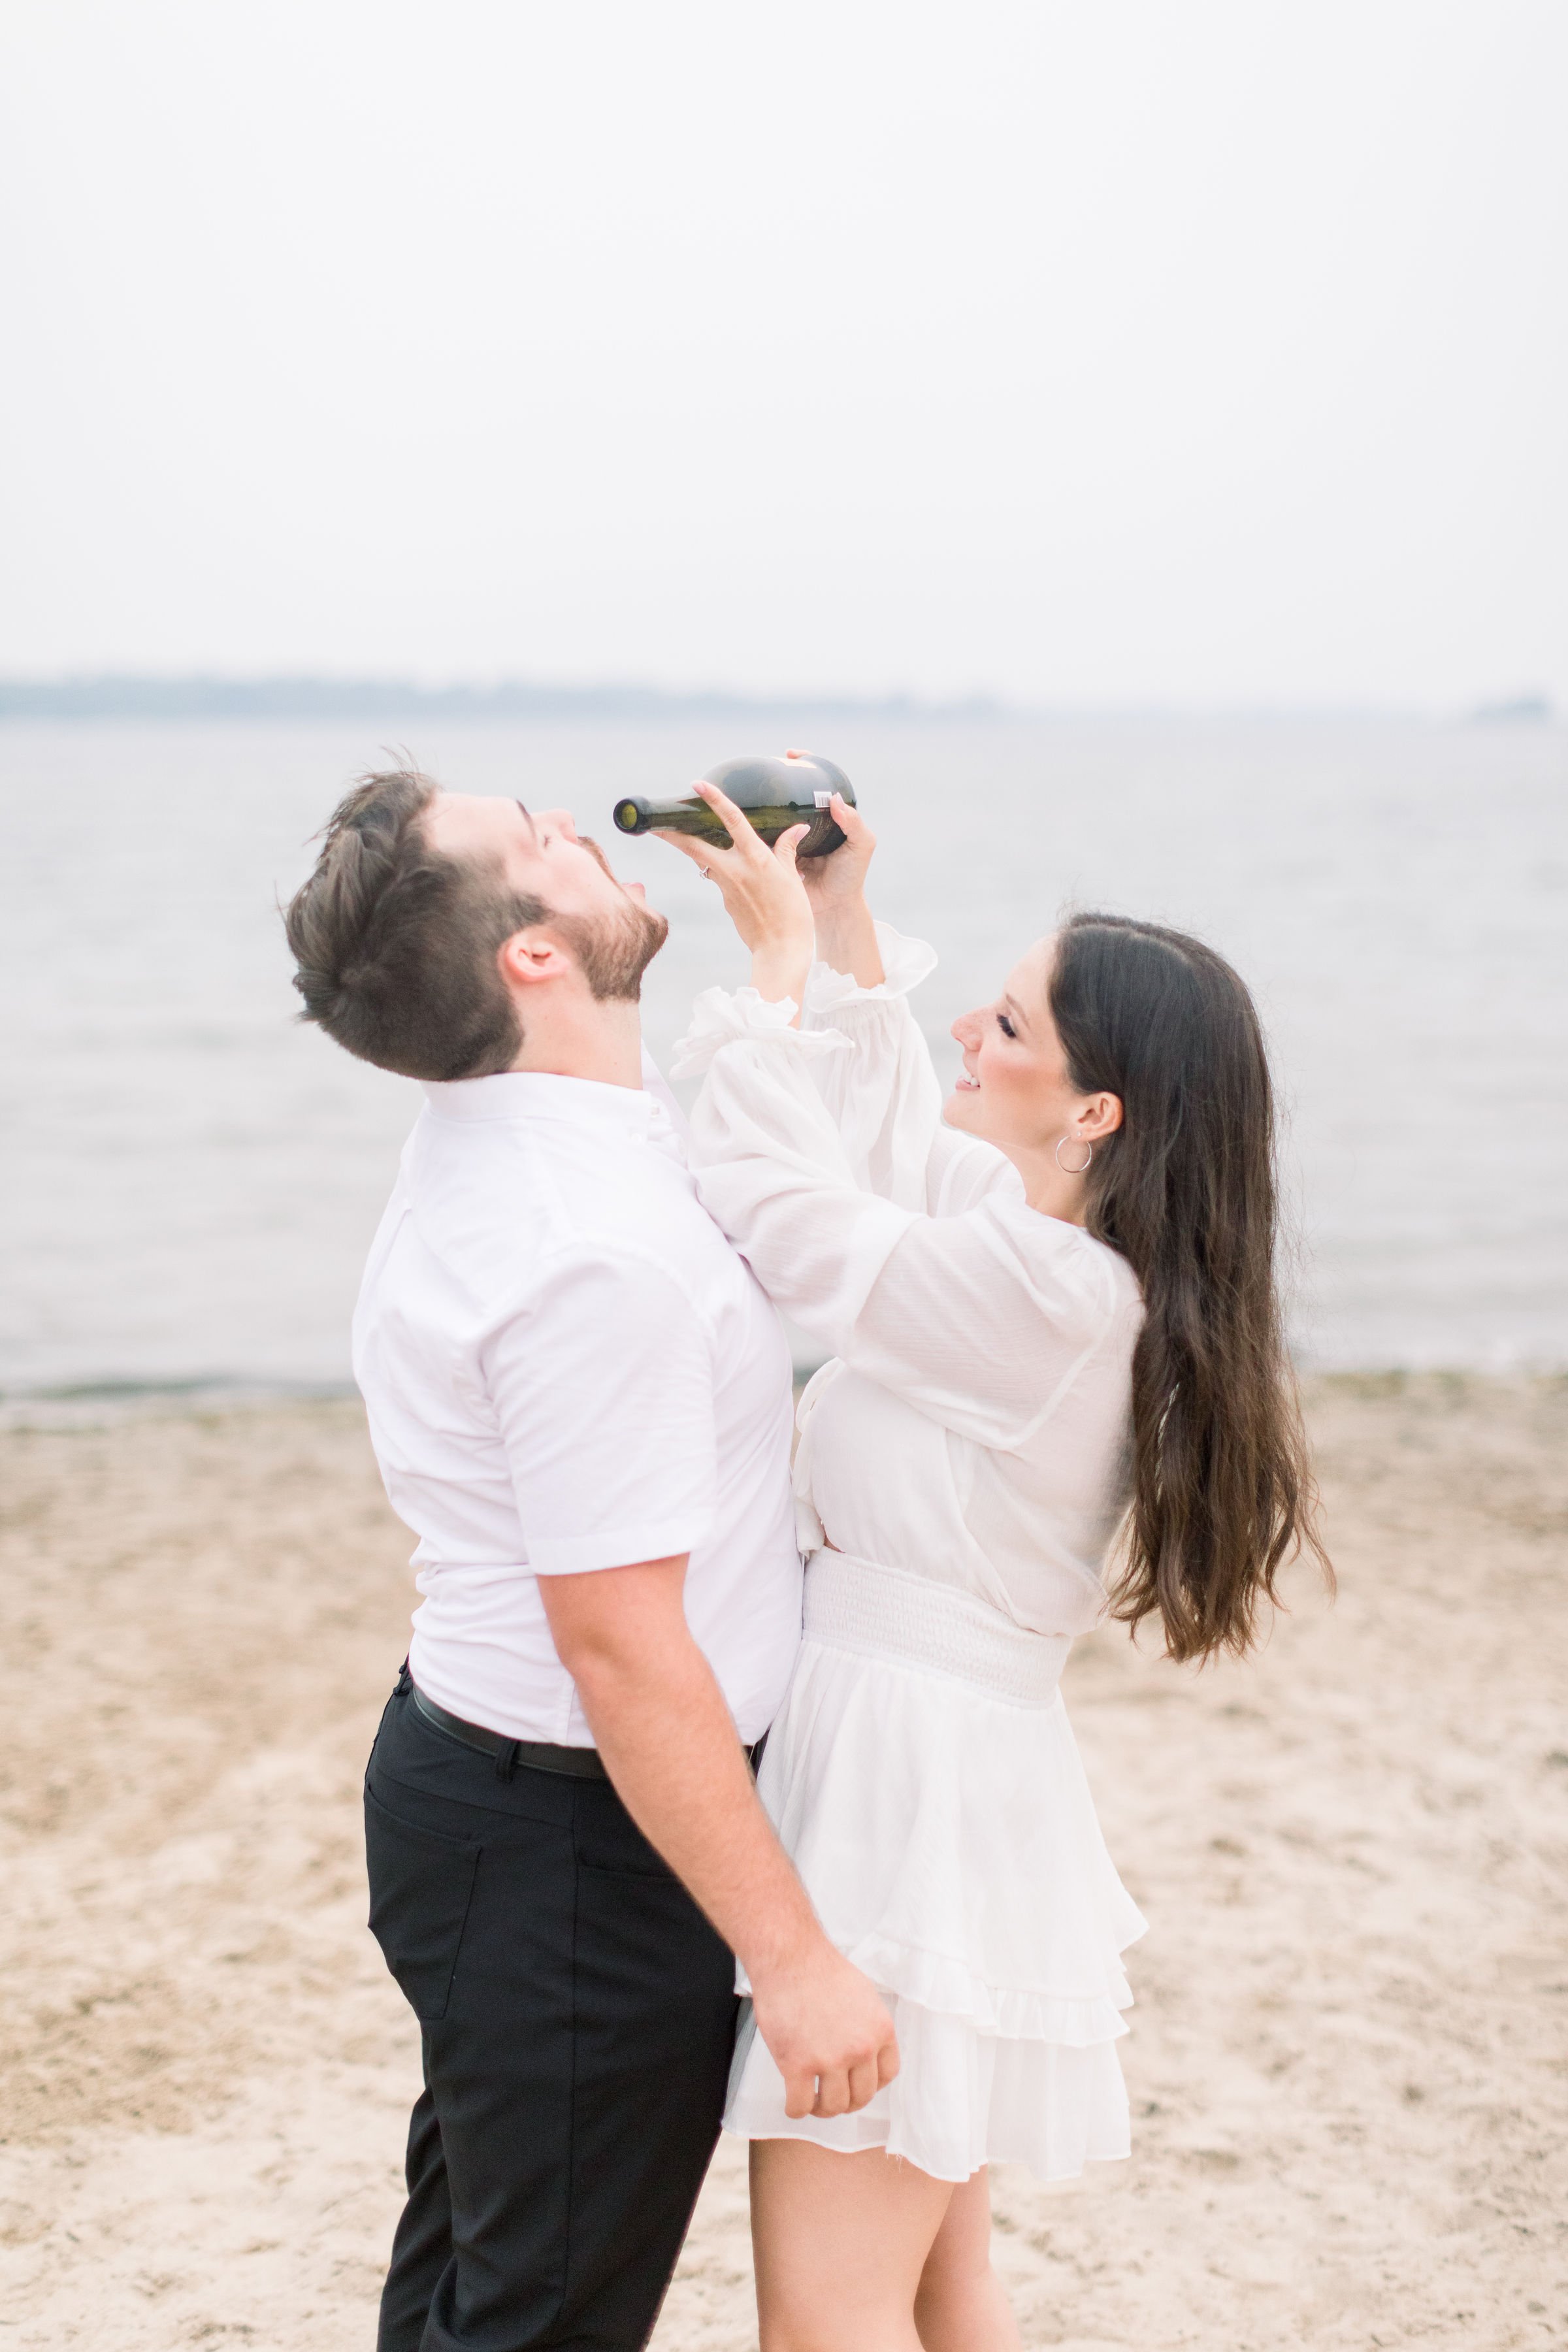  On a lakeshore, a woman pours a bottle of champagne into her fiance’s mouth by Chelsea Mason Photography. white dress summer #Kingstonengagement #GrassCreekParkPortraits #Ontarioengagementphotographer #Chelseamasonphotography #Chelseamasonengagement